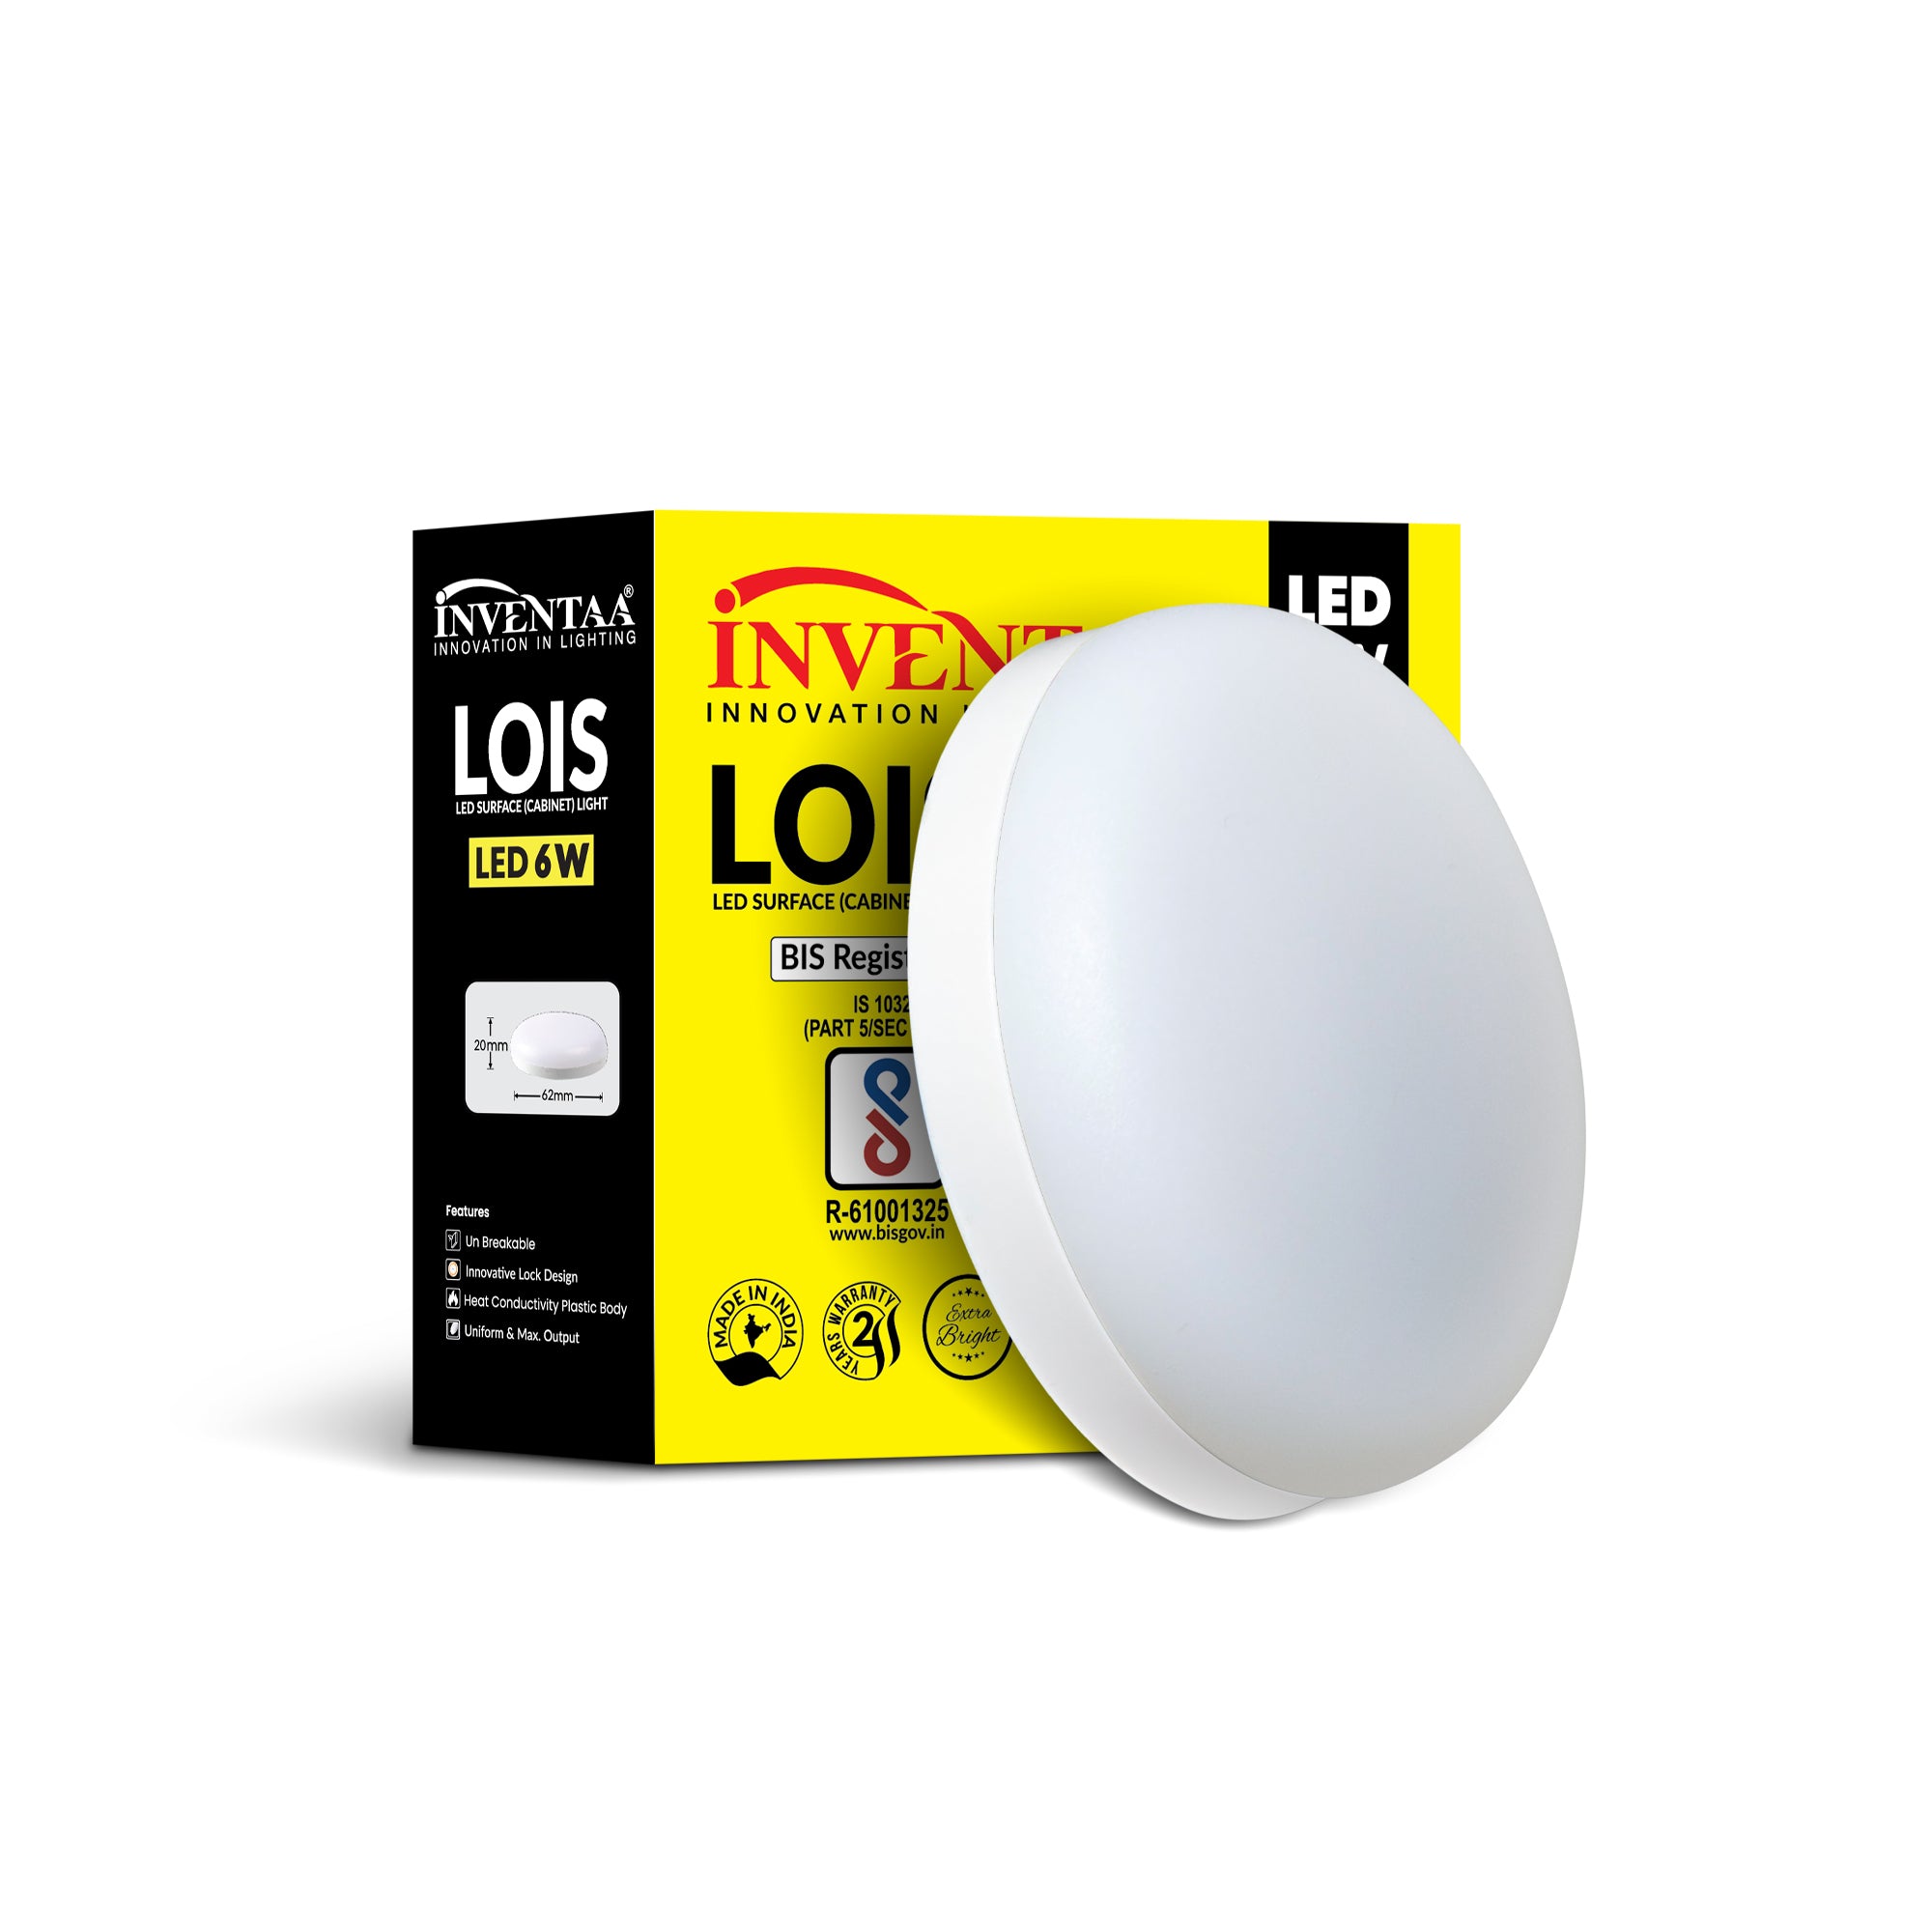 Lois 6W LED Cabinent Light With Its Box Enclosure #watts_6w